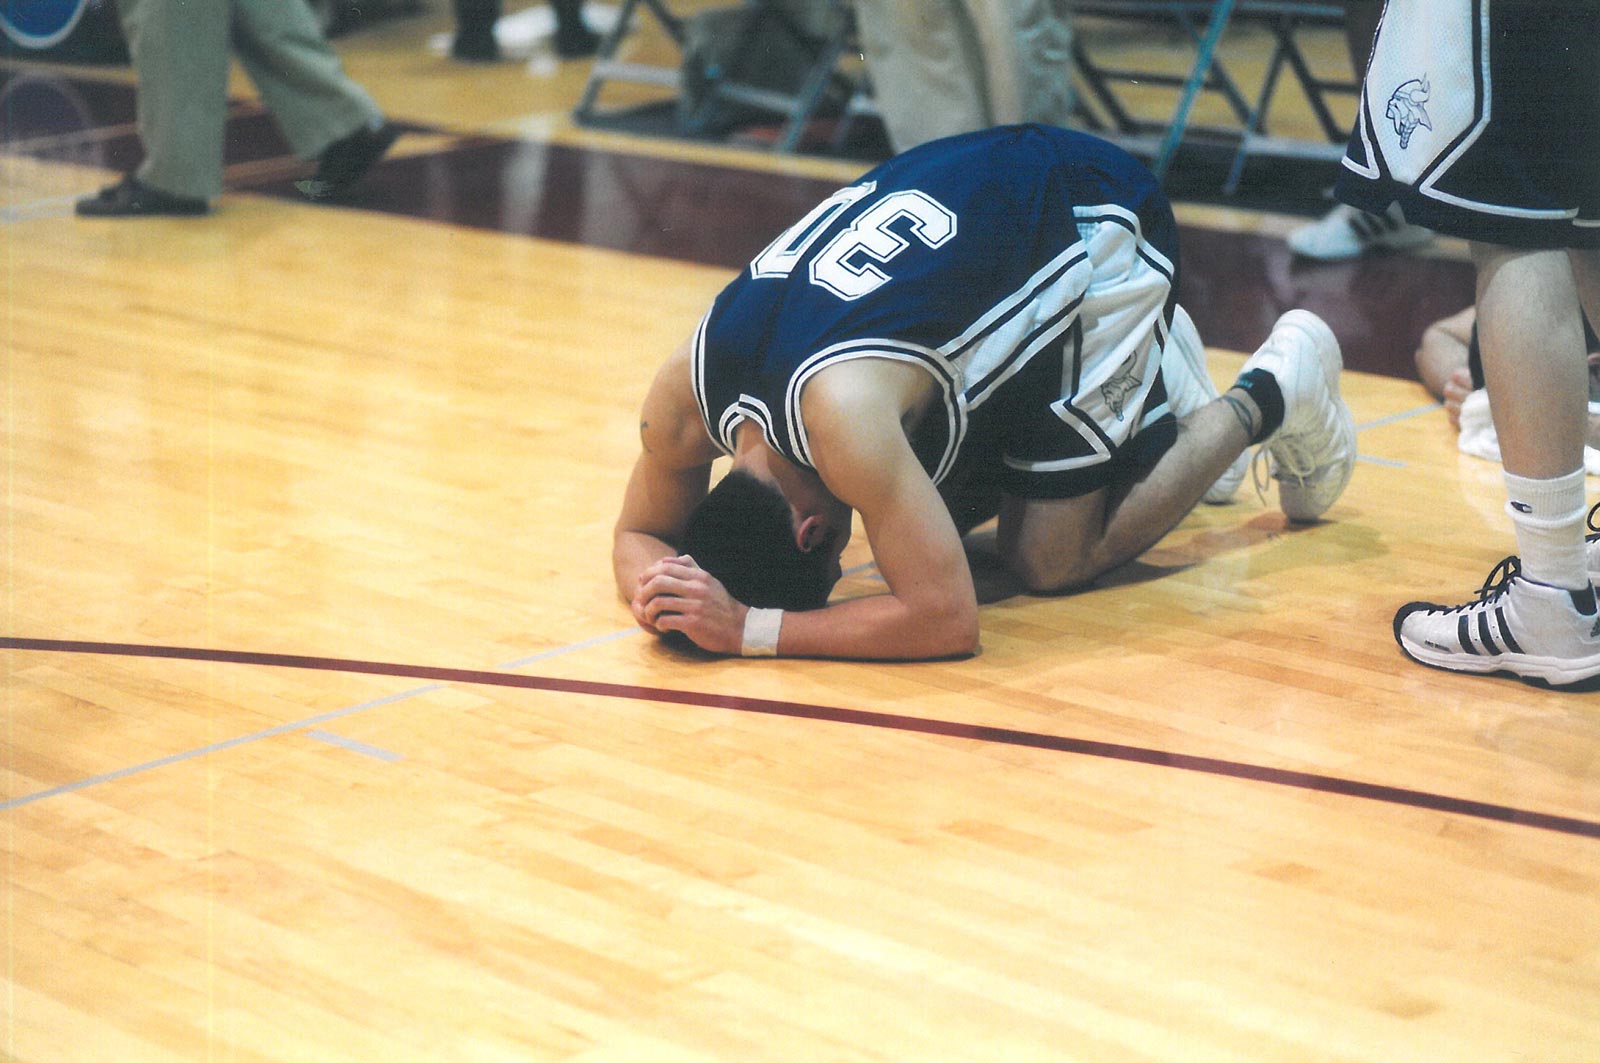 Rob Nenahlo falls to the floor as the game against UWSP ends 